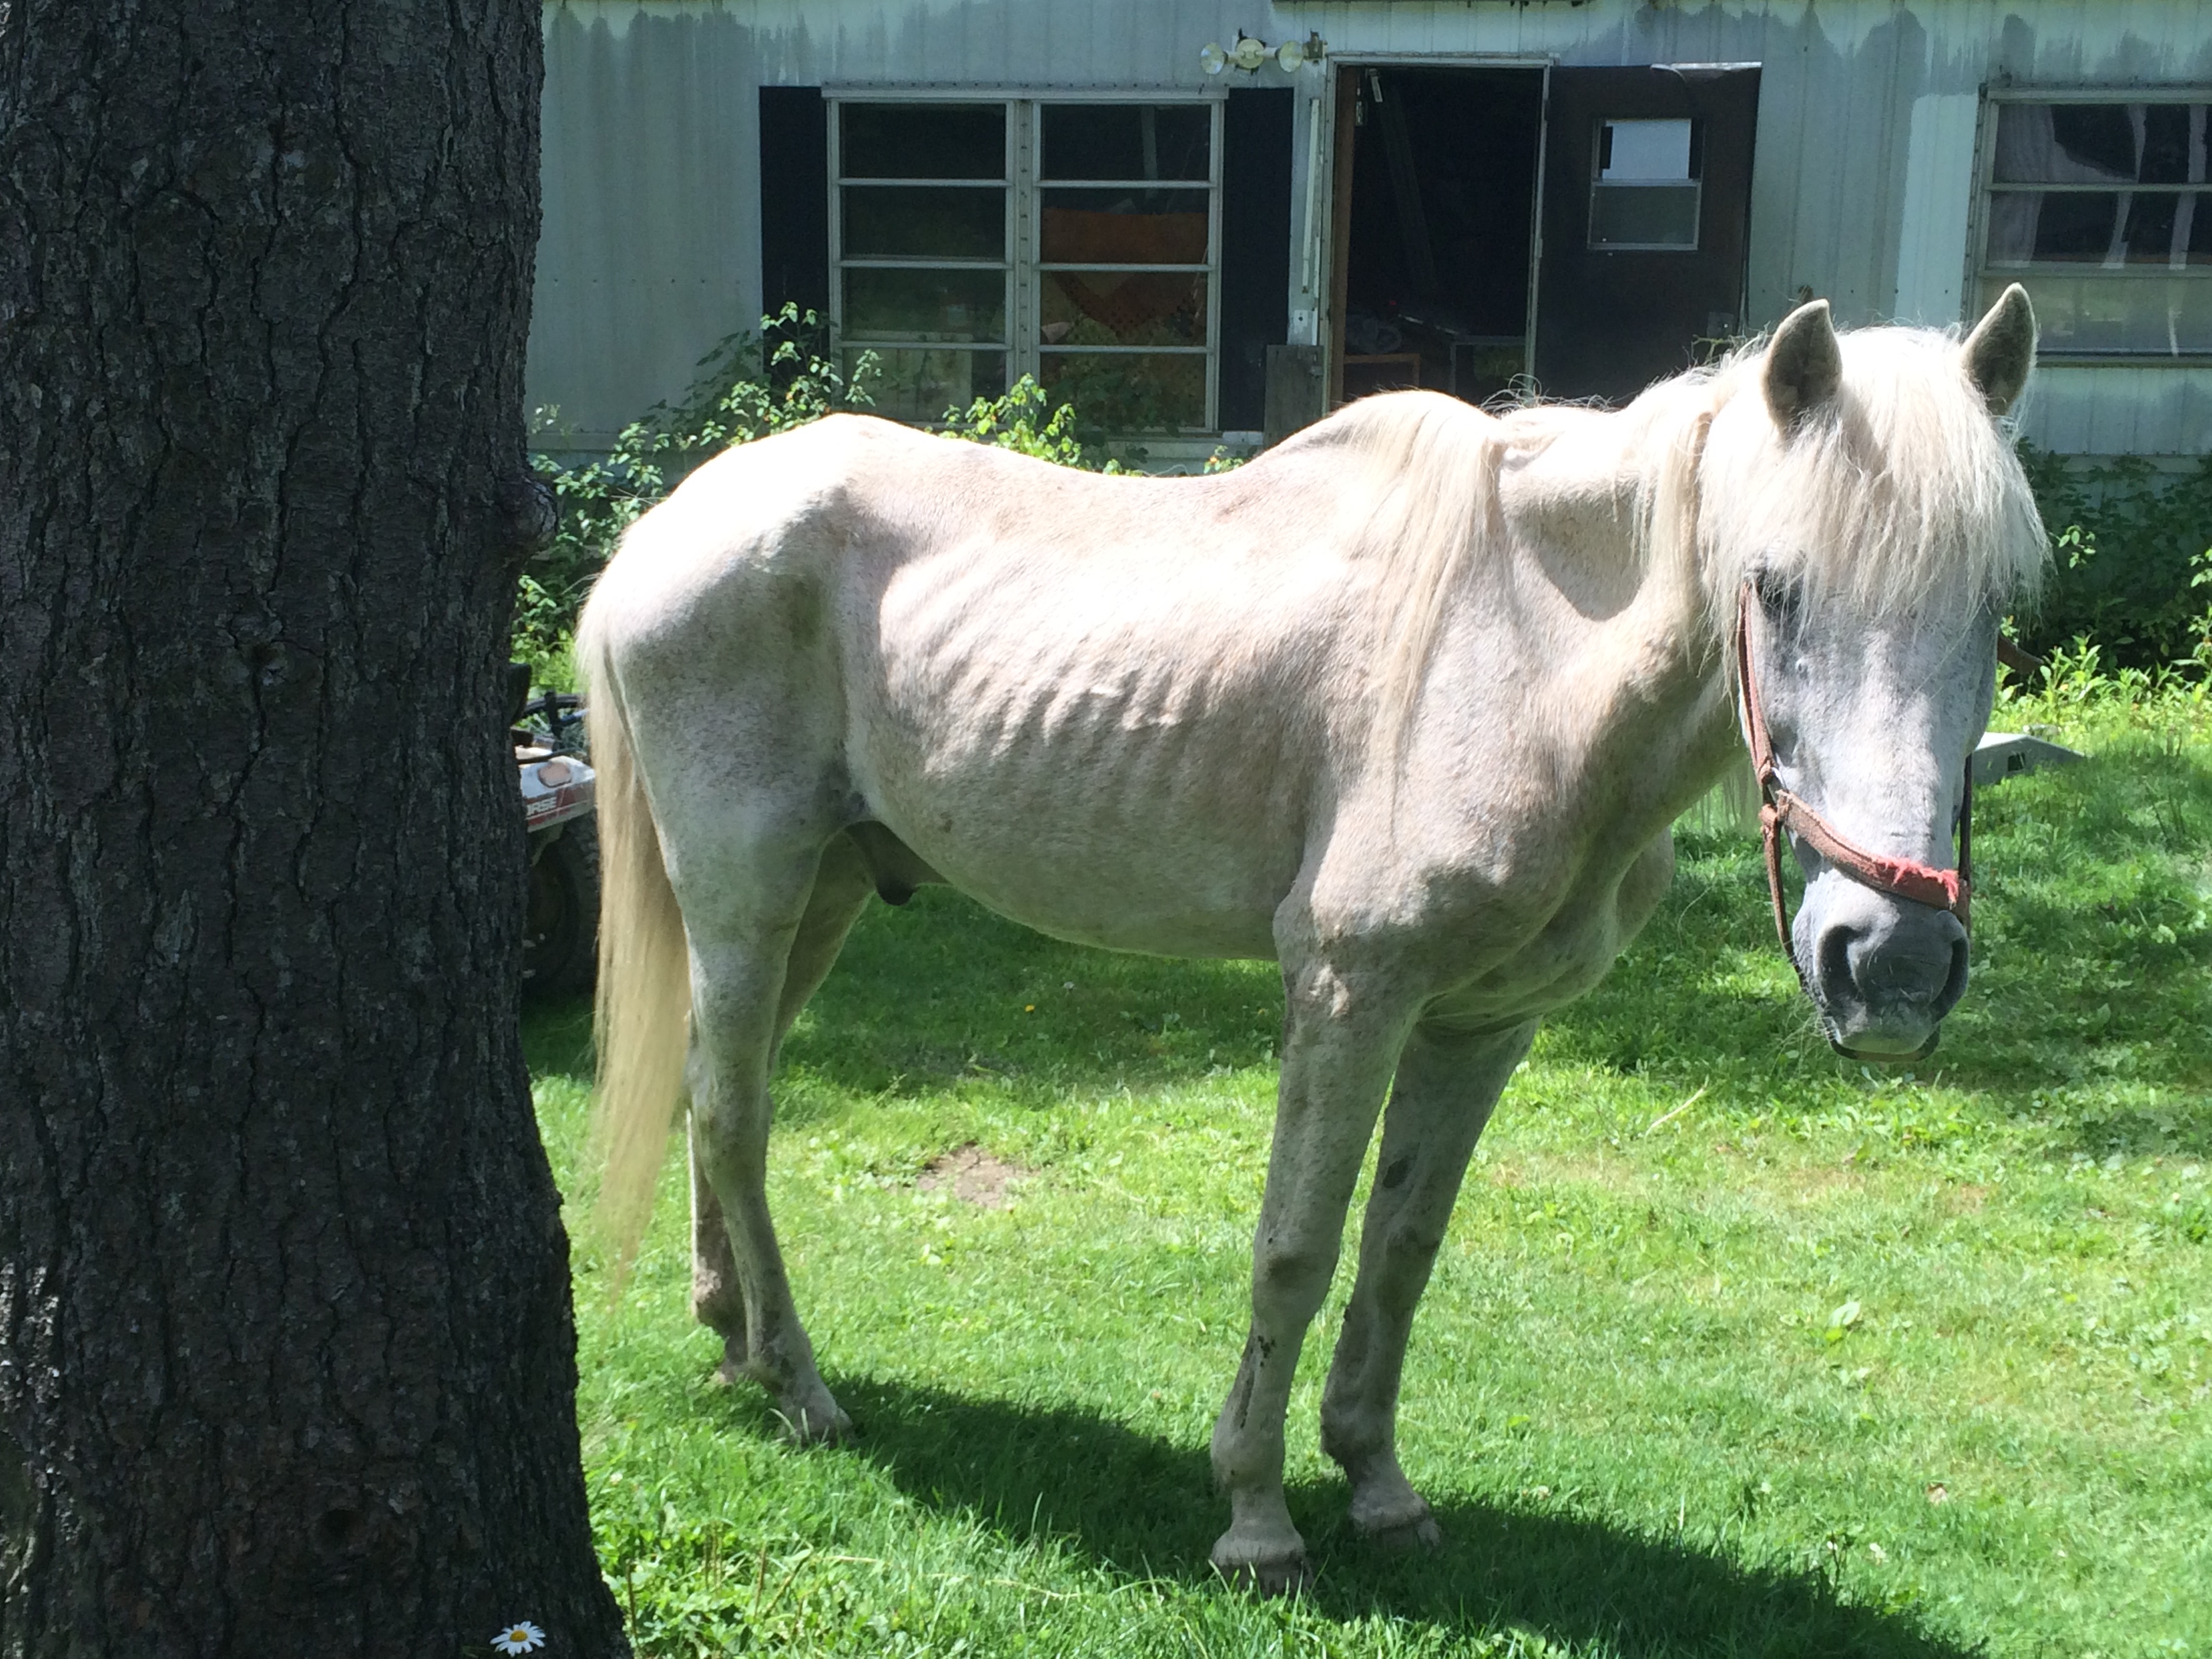 Two arrested in Lockwood after horse seized from property